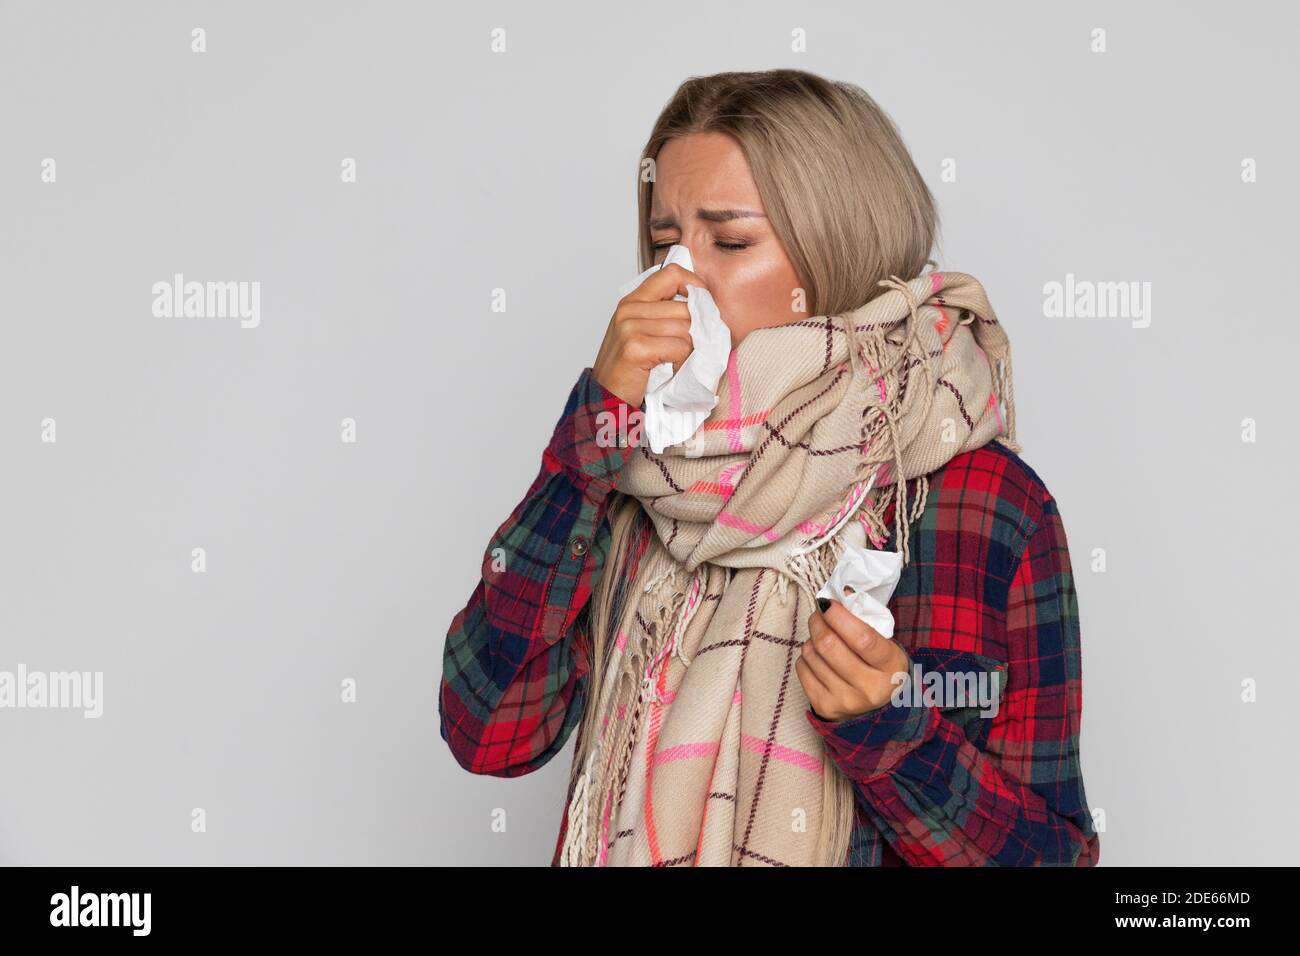 Upset sick woman sneezing or using napkin to wipe snot from her nose. Sick female has flu. Rhinitis, cold season, sickness Stock Photo